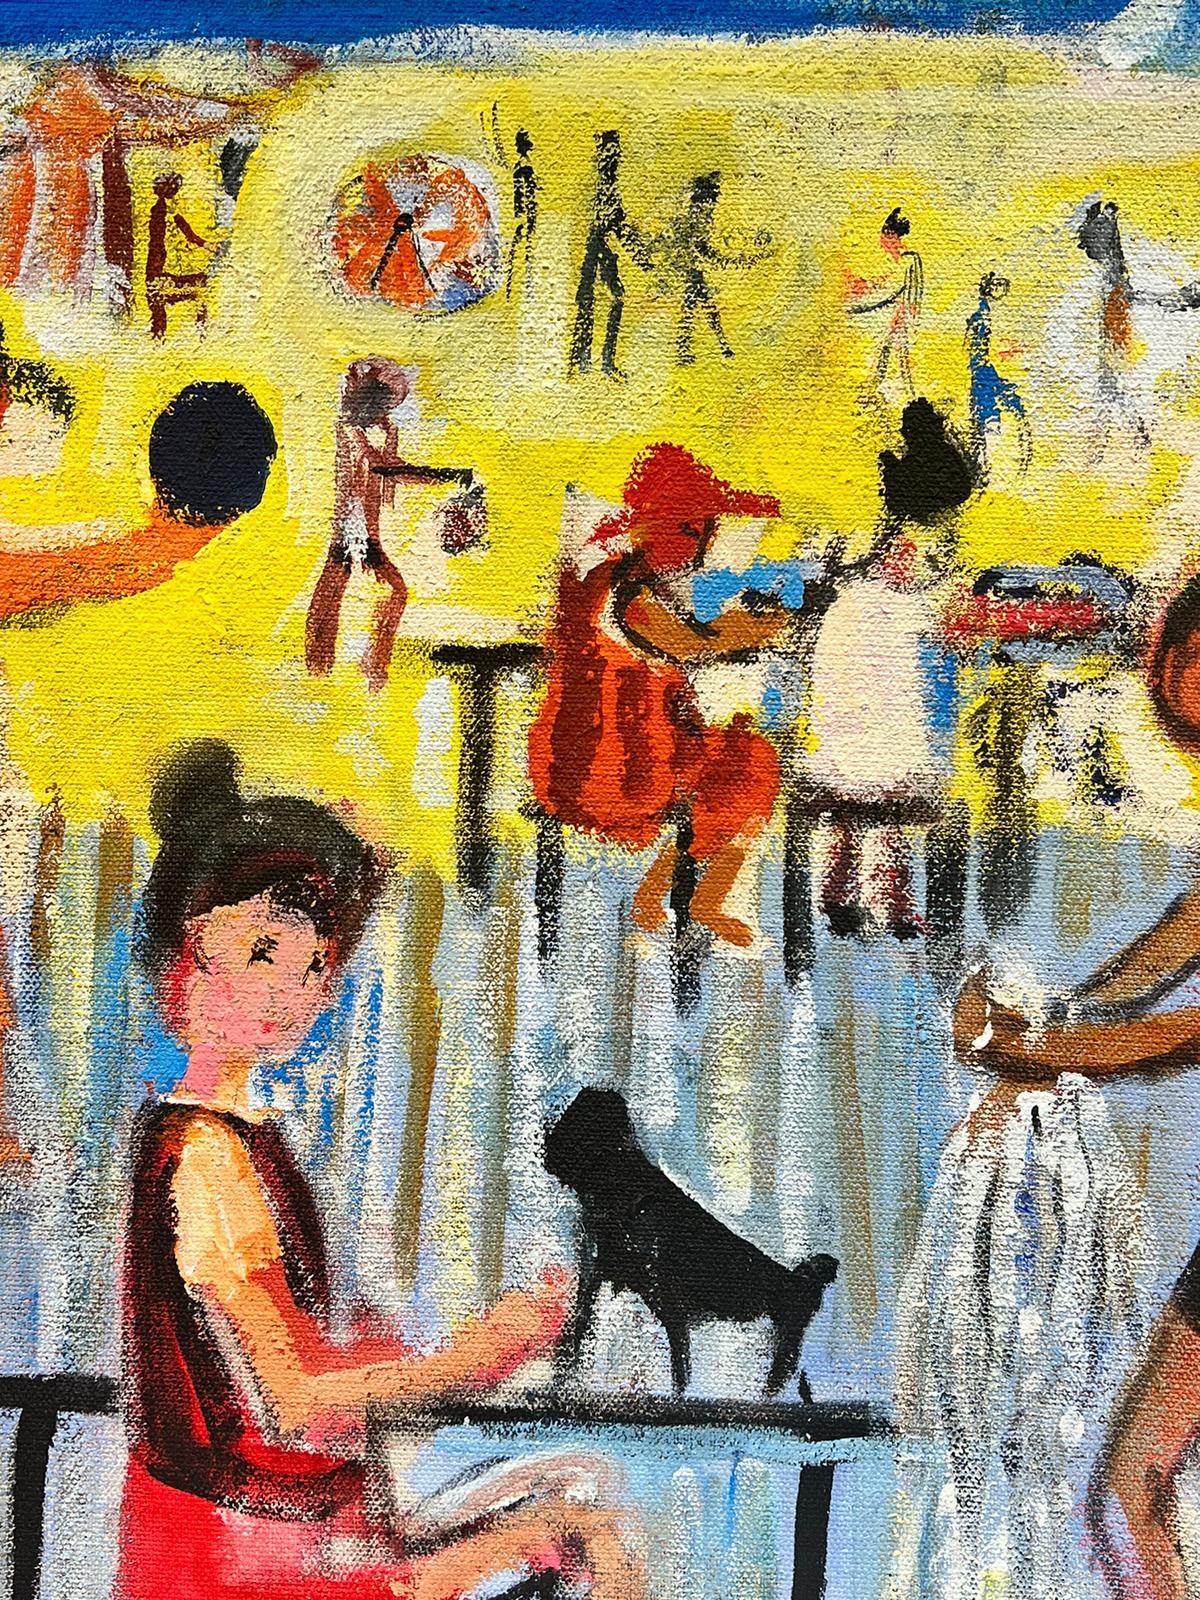 Large French Contemporary Modernist Oil Painting Figures Playing on Sunny Beach For Sale 2